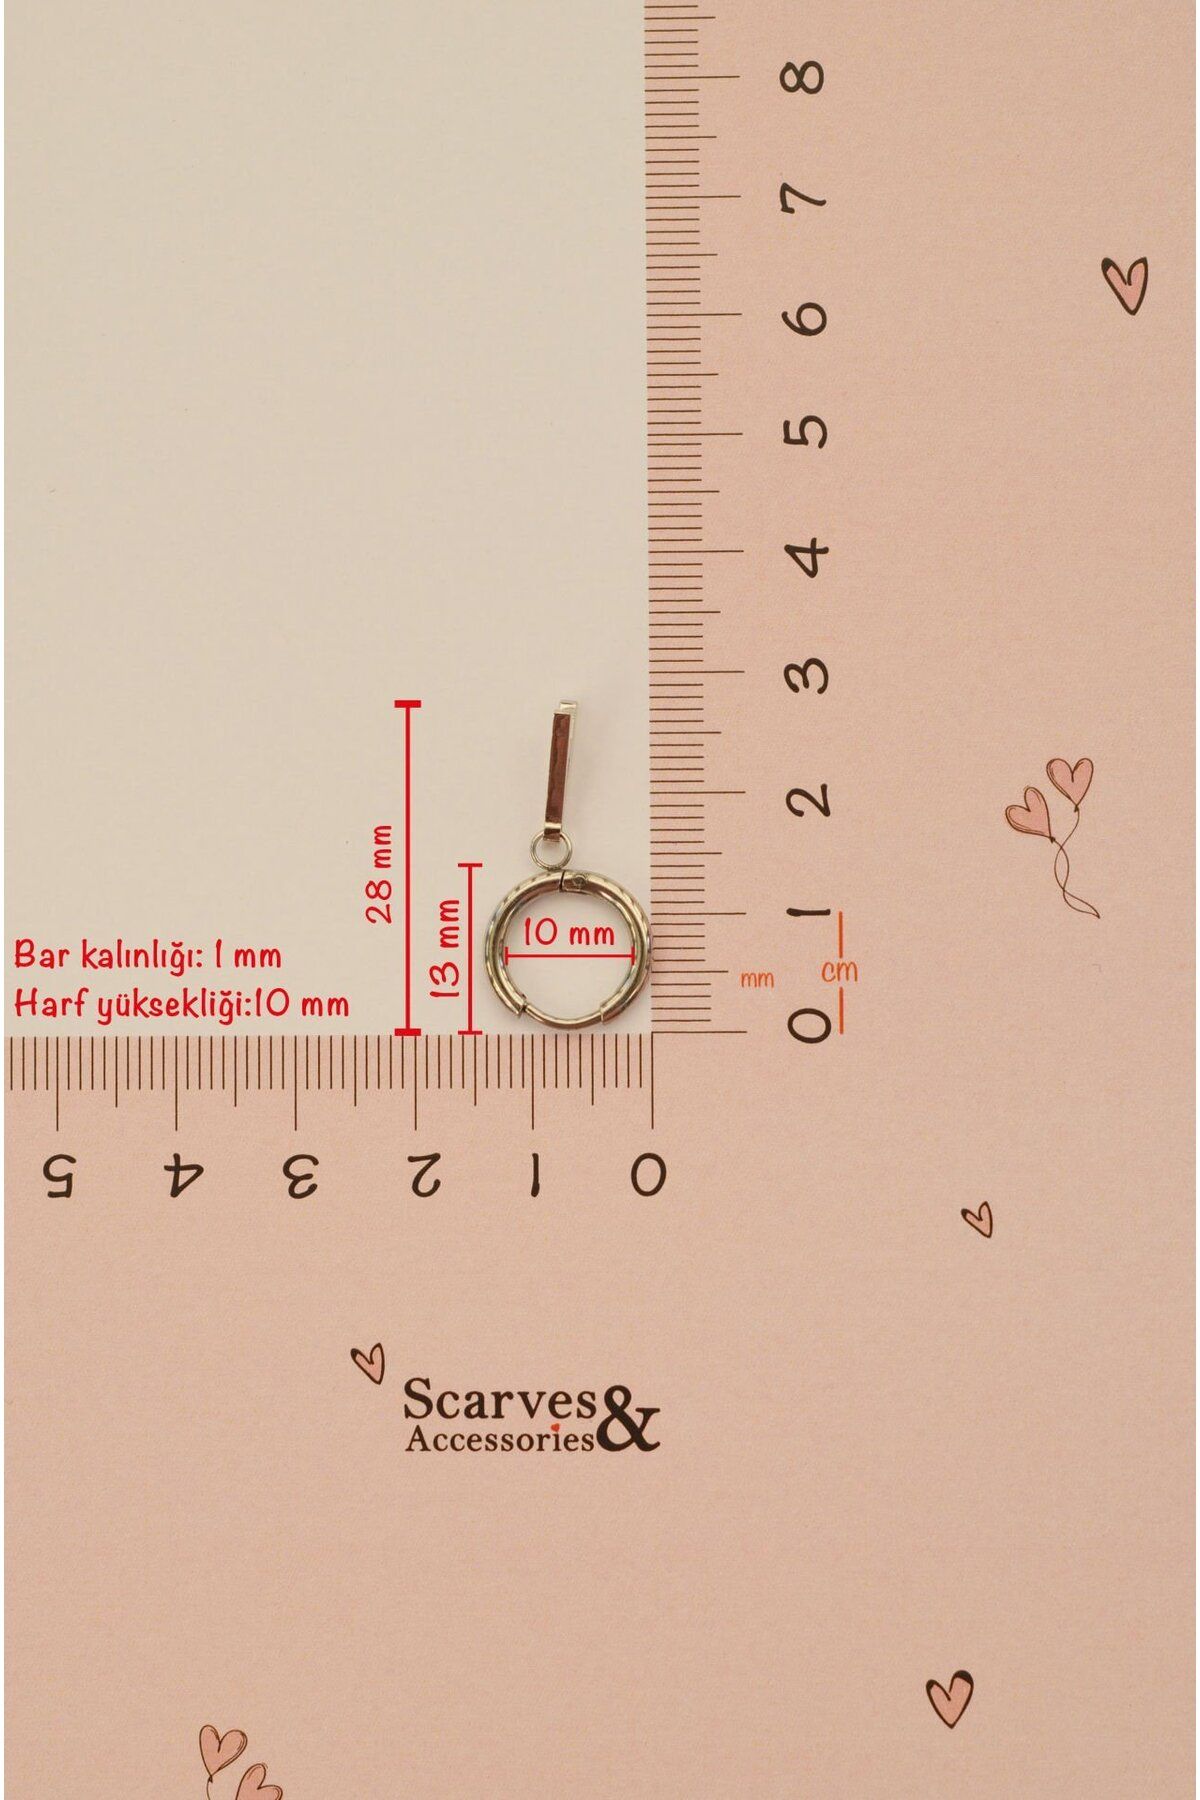 How to measure ring size in cm and inches guide for women | Simply Bo